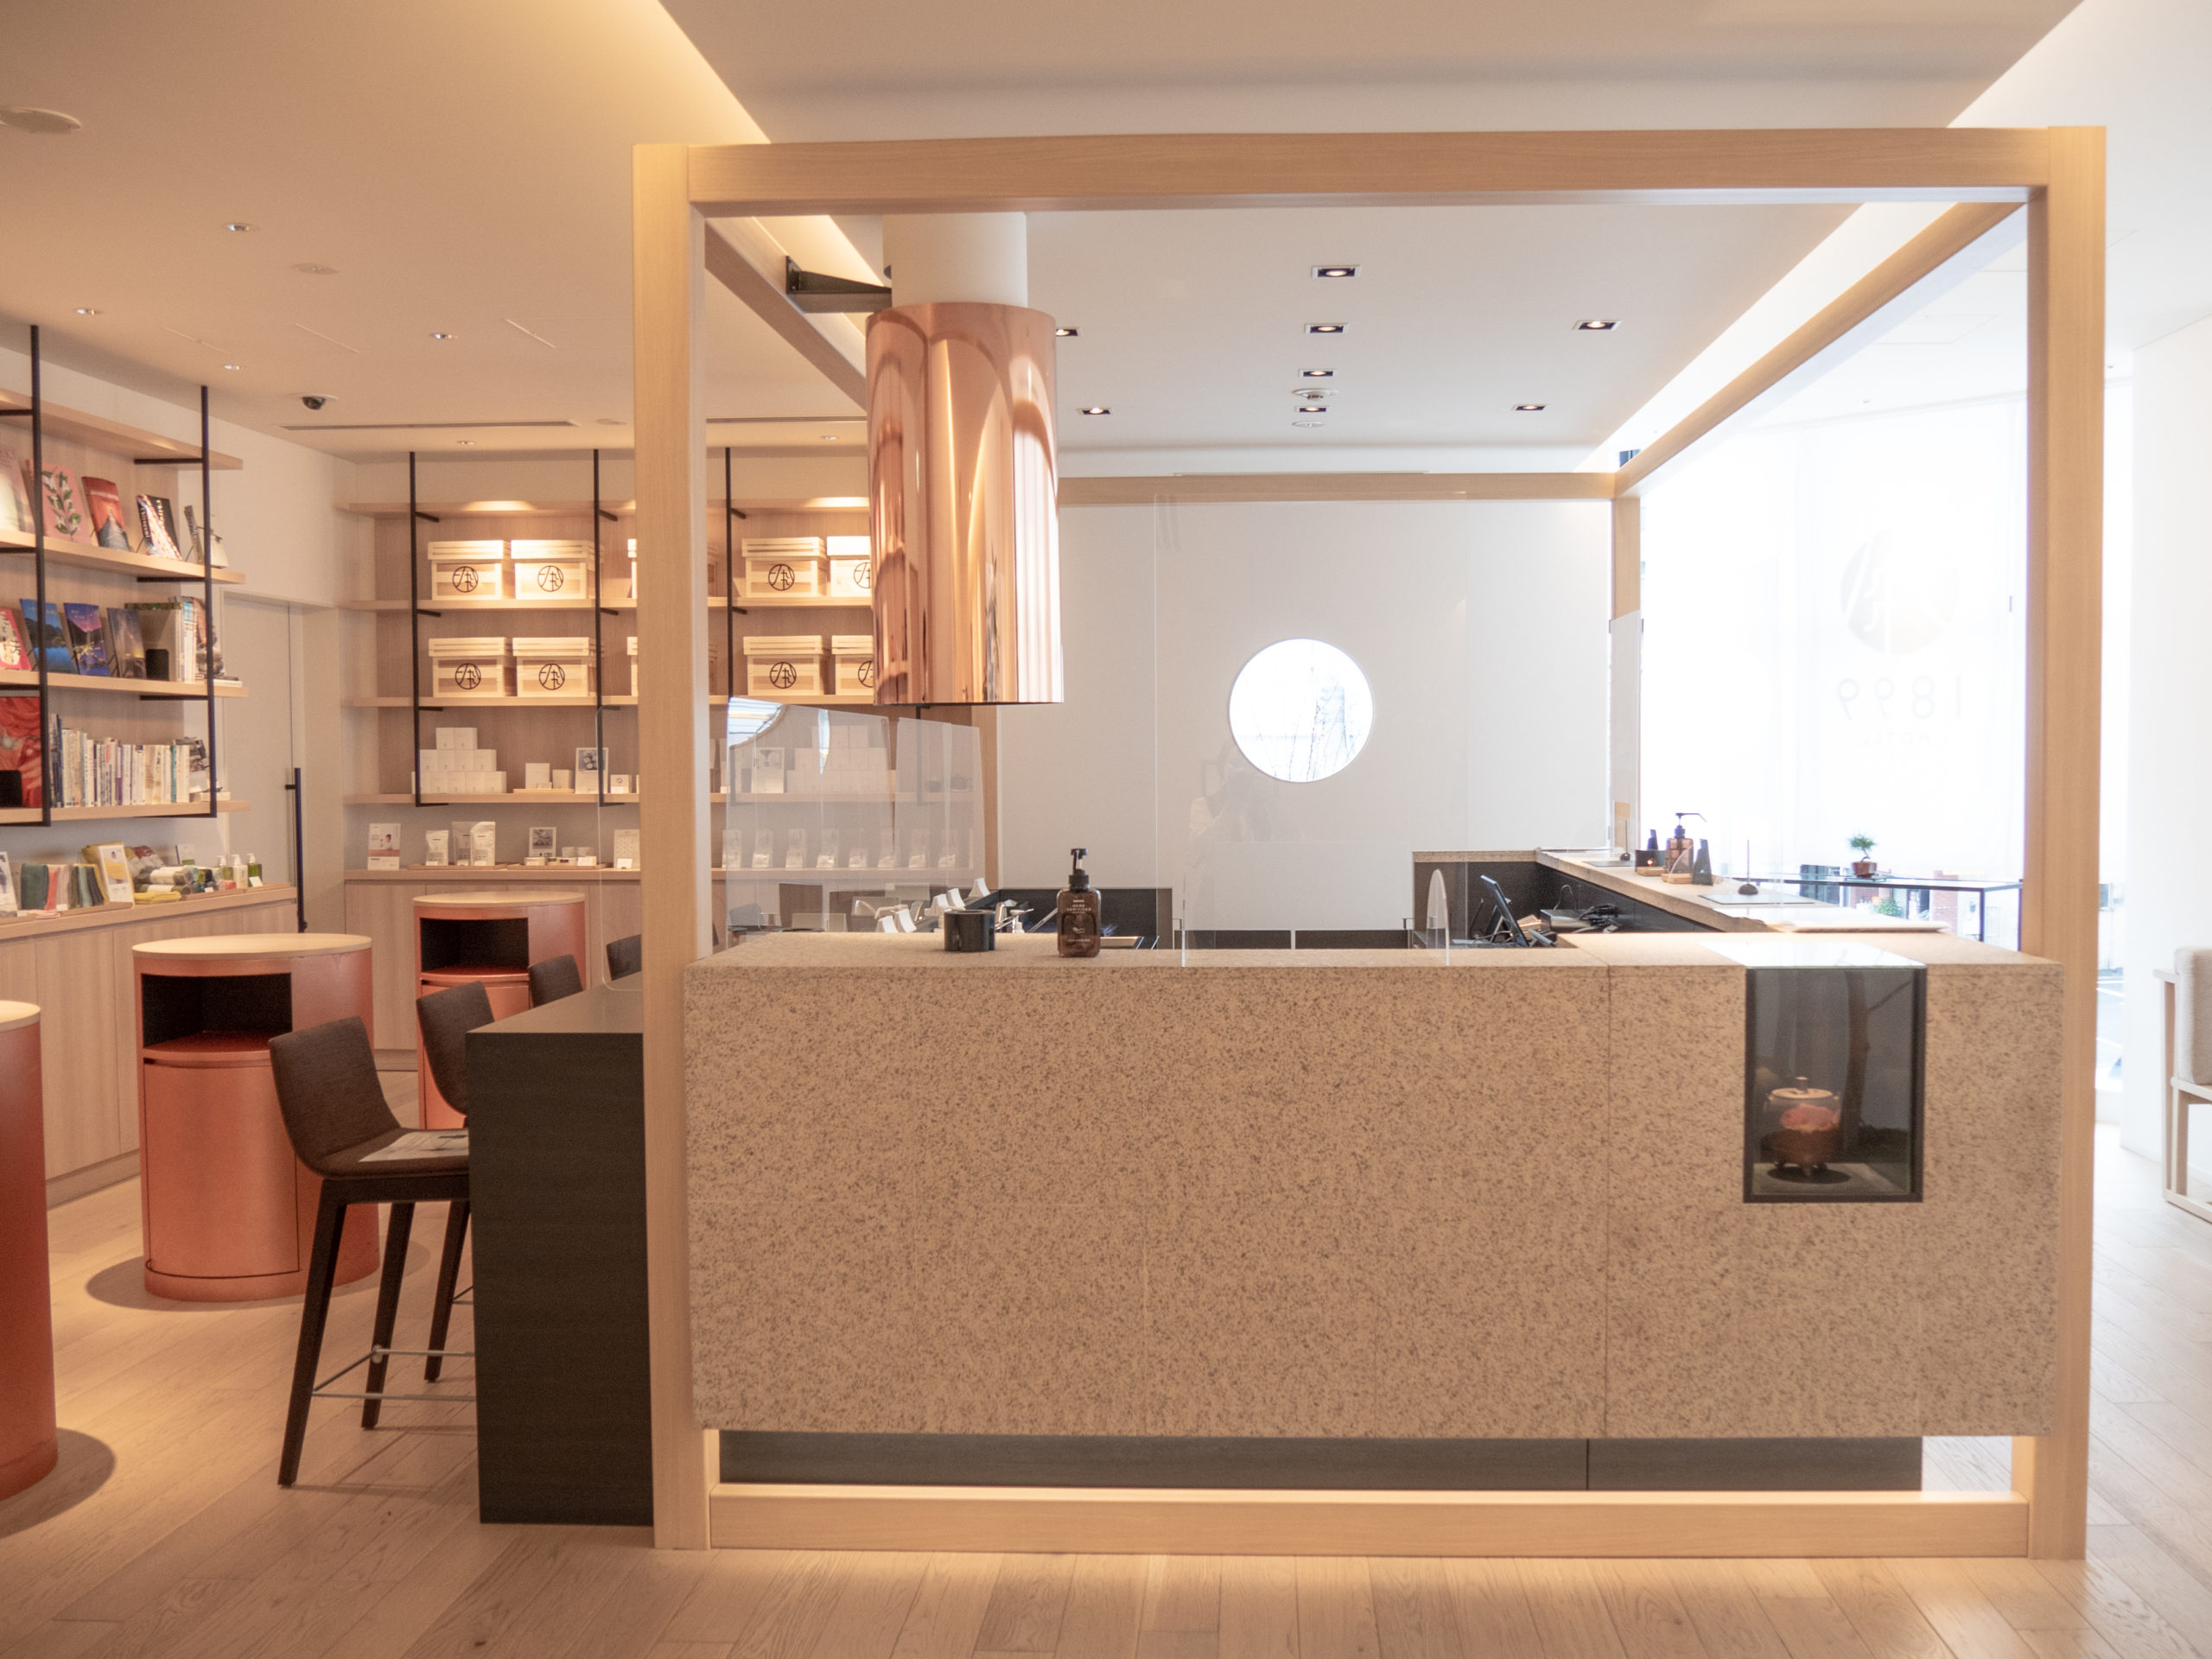 The design of the front desk was inspired by that of a traditional tea room, complete with a round window